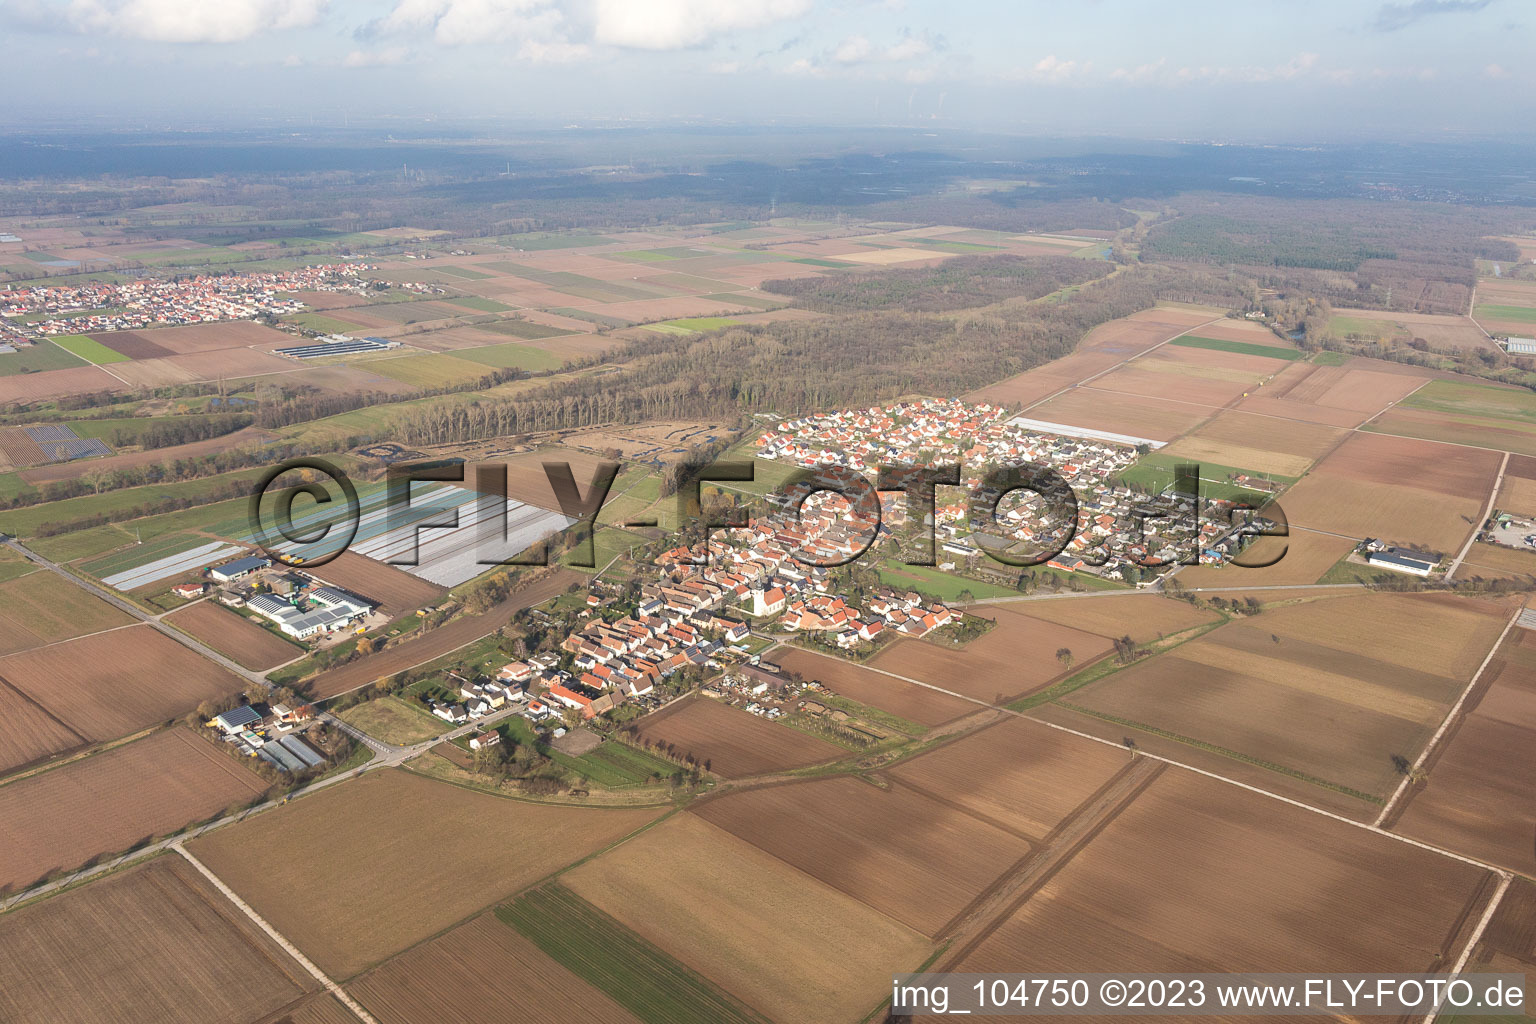 Freisbach in the state Rhineland-Palatinate, Germany seen from above